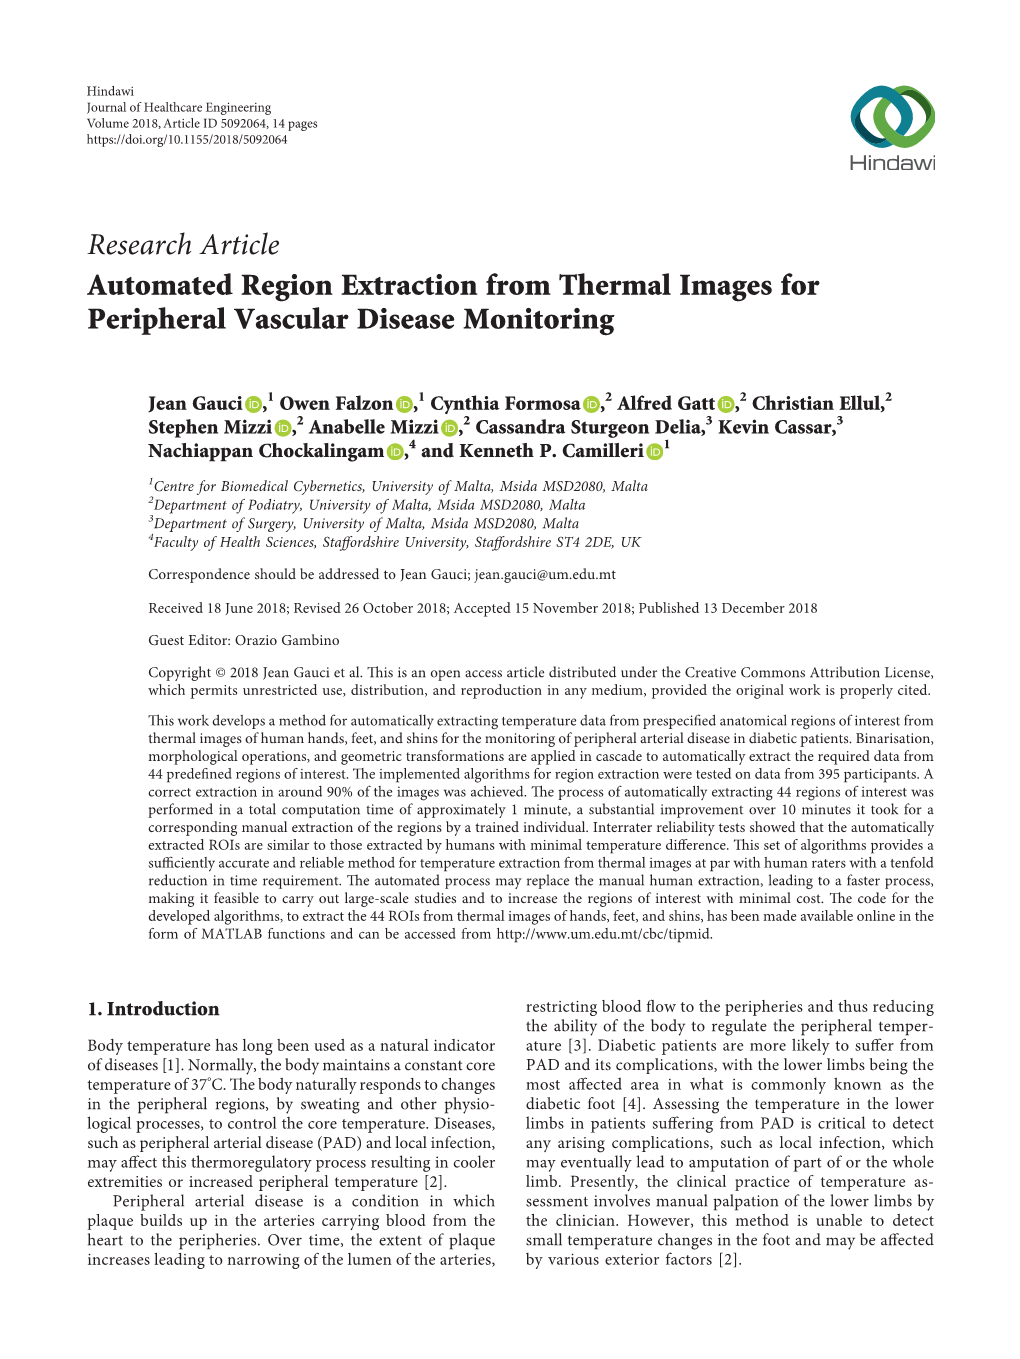 Research Article Automated Region Extraction from Thermal Images for Peripheral Vascular Disease Monitoring